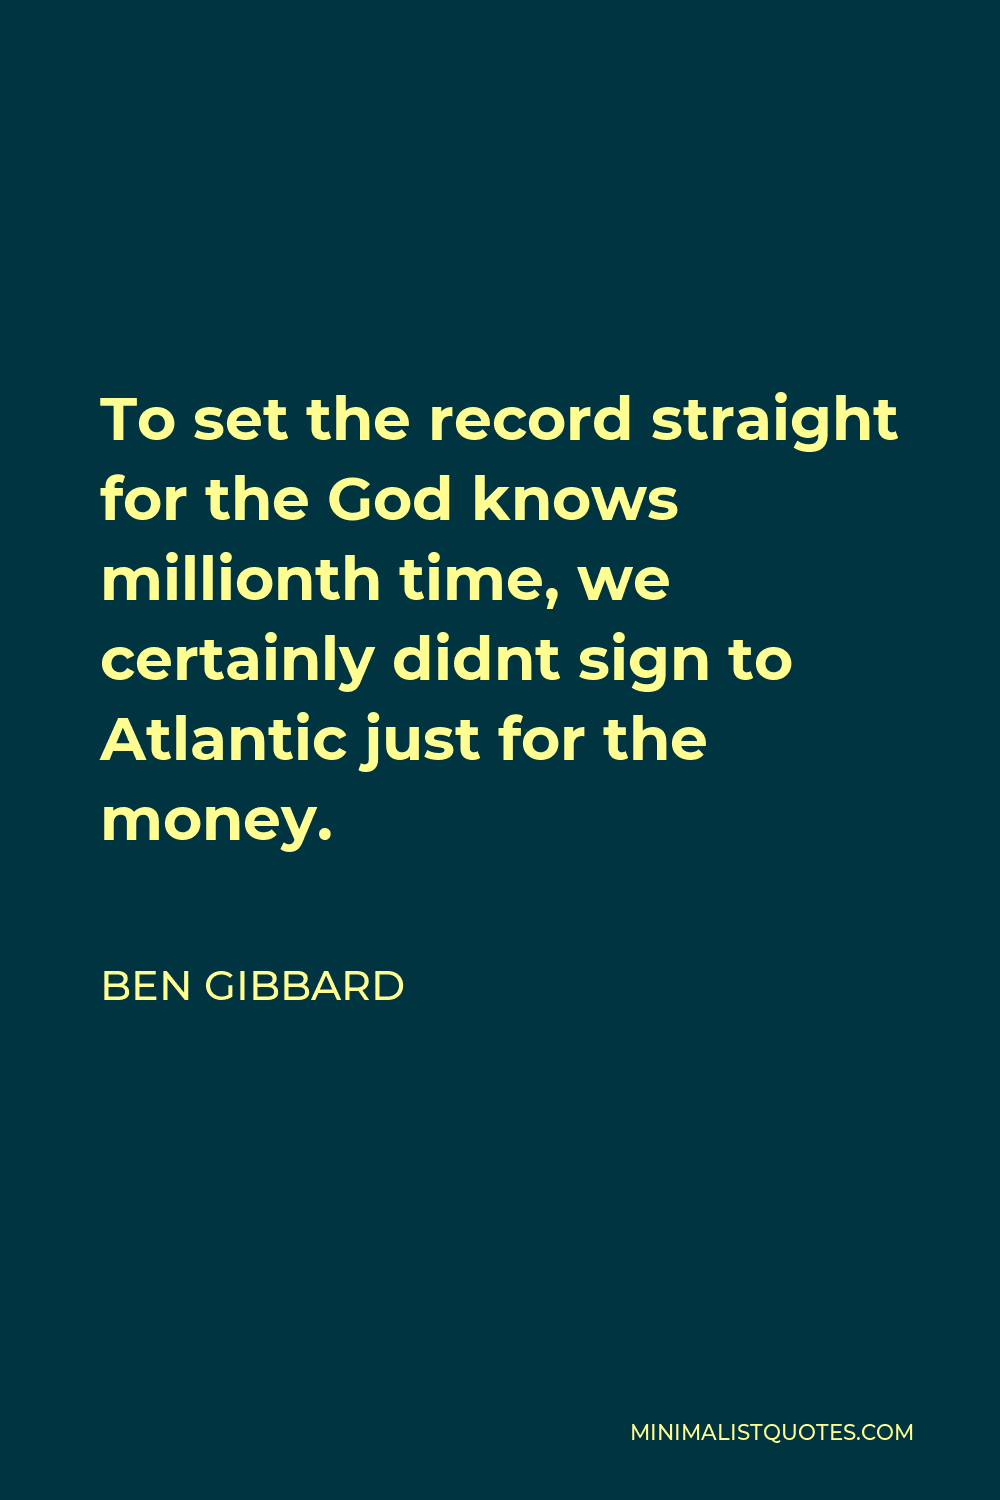 Ben Gibbard Quote - To set the record straight for the God knows millionth time, we certainly didnt sign to Atlantic just for the money.